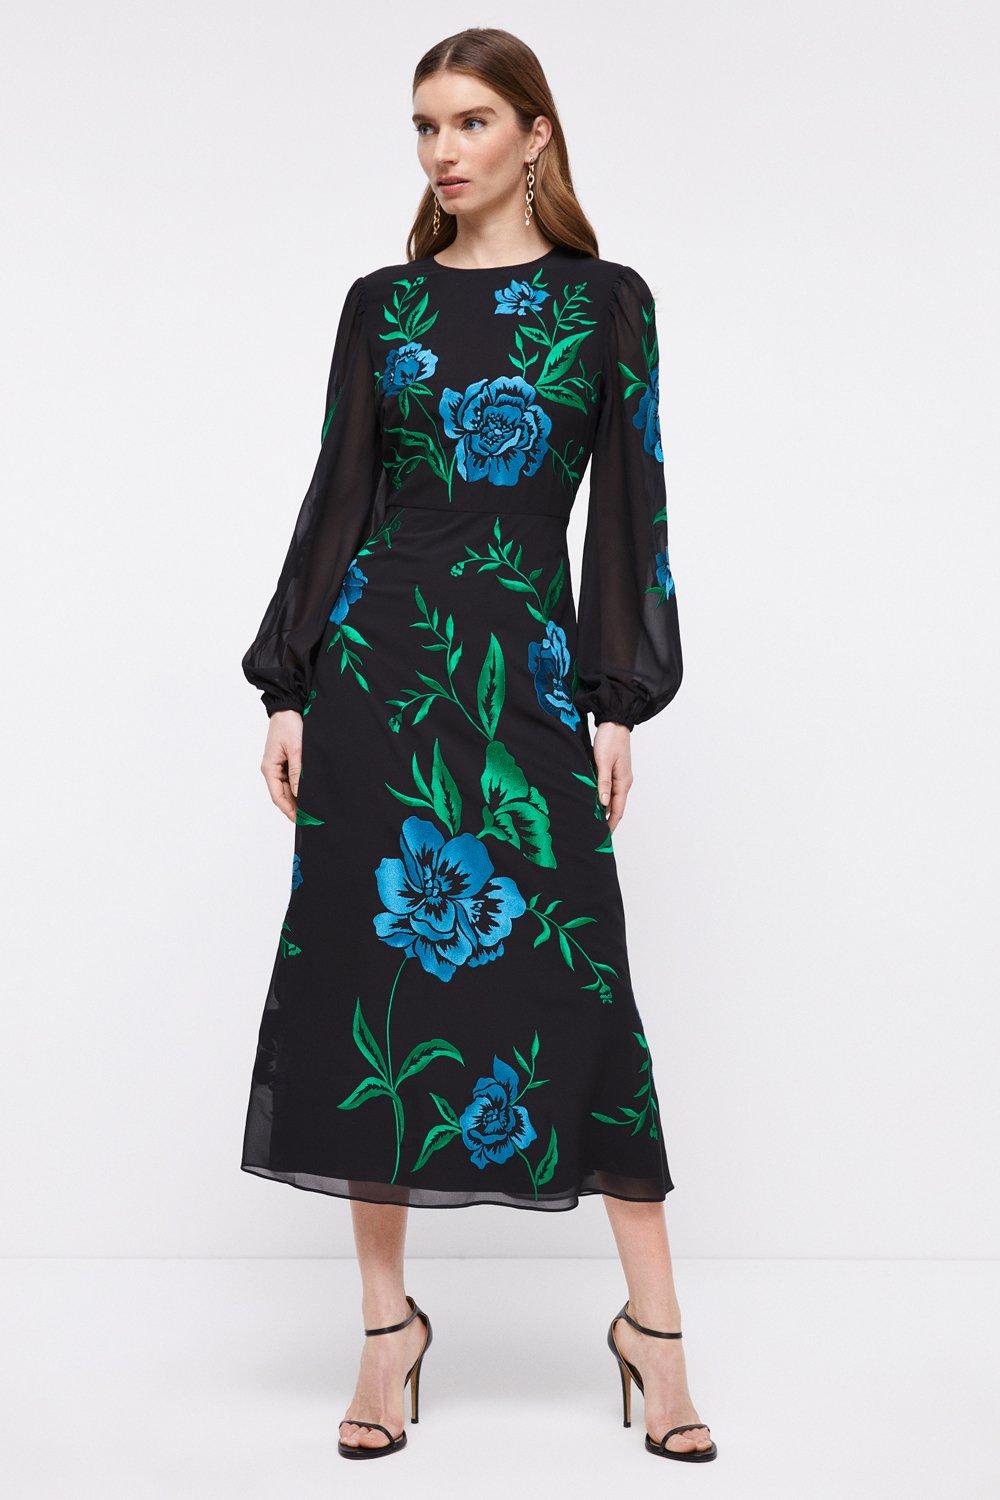 Petite Blooming Marigold Embroidered Dress